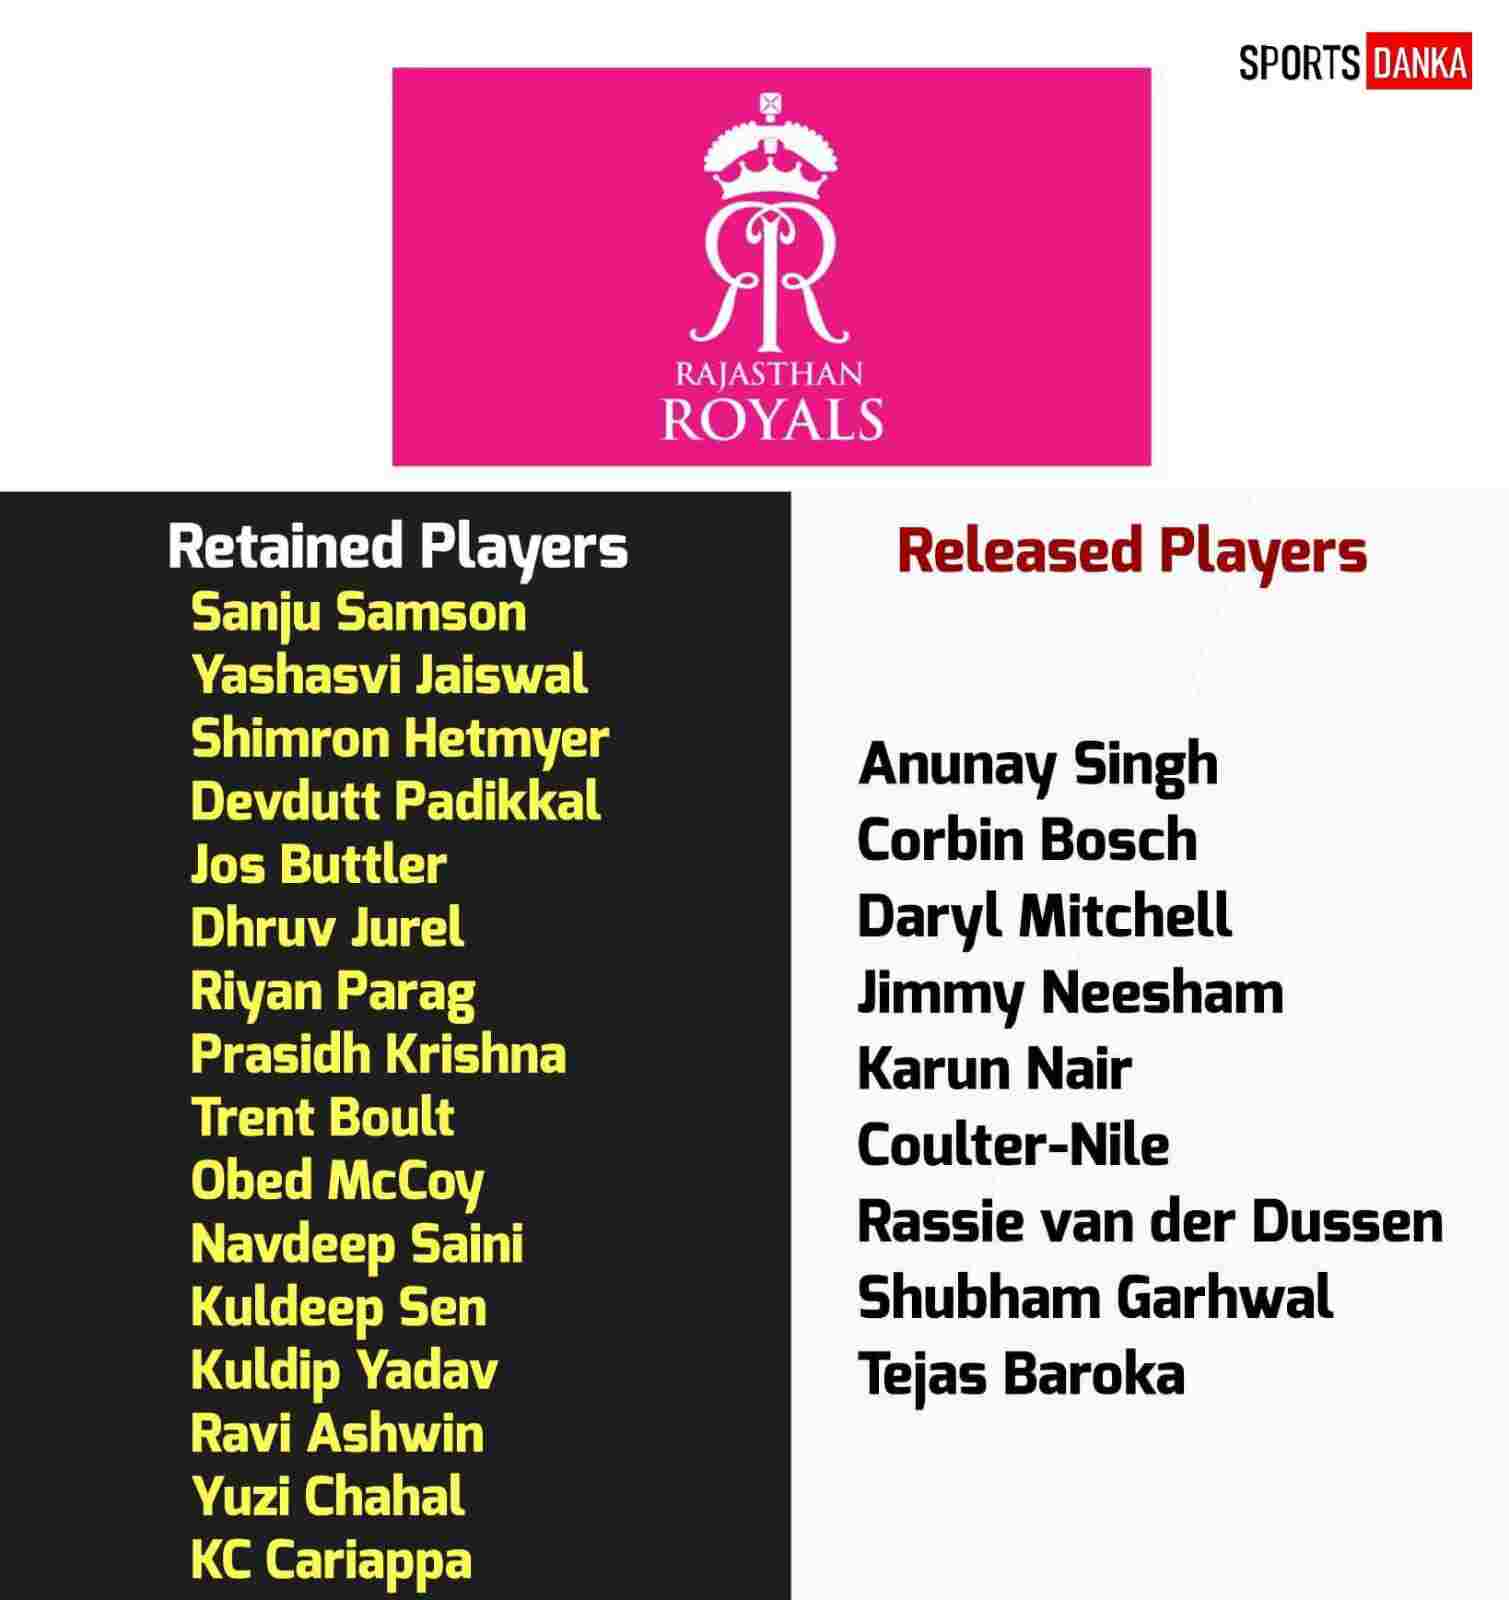 Rajasthan Royals retained and released players